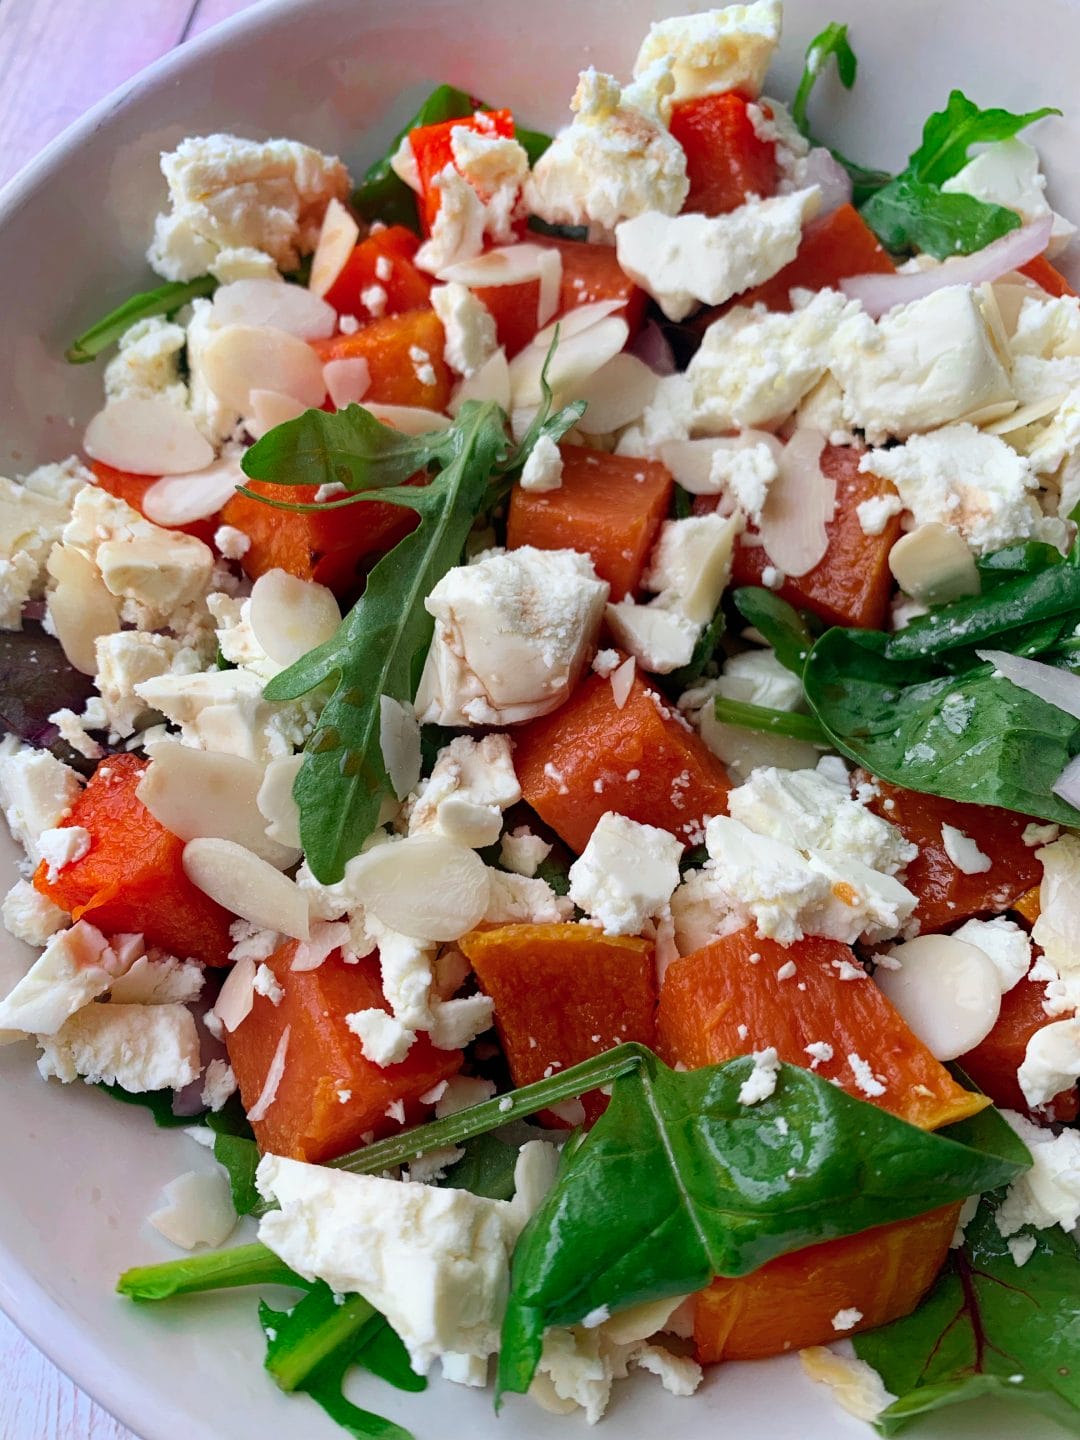 Leafy green salad of arugula, baby spinach with roast pumpkin and feta cheese